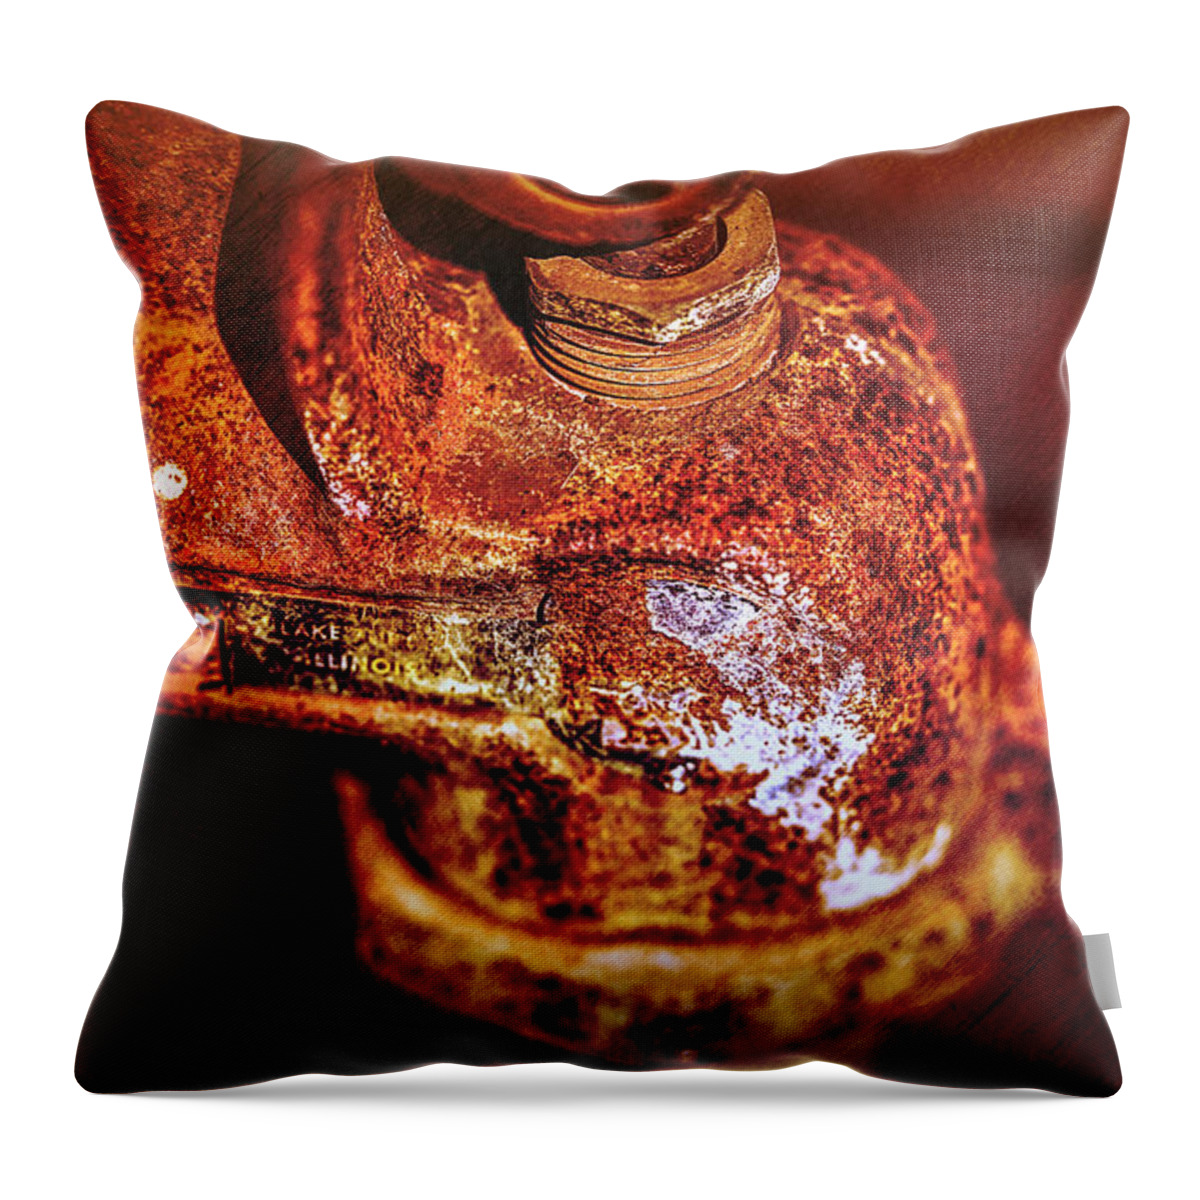 Heavy Throw Pillow featuring the photograph Heavy Metal by Theresa Campbell